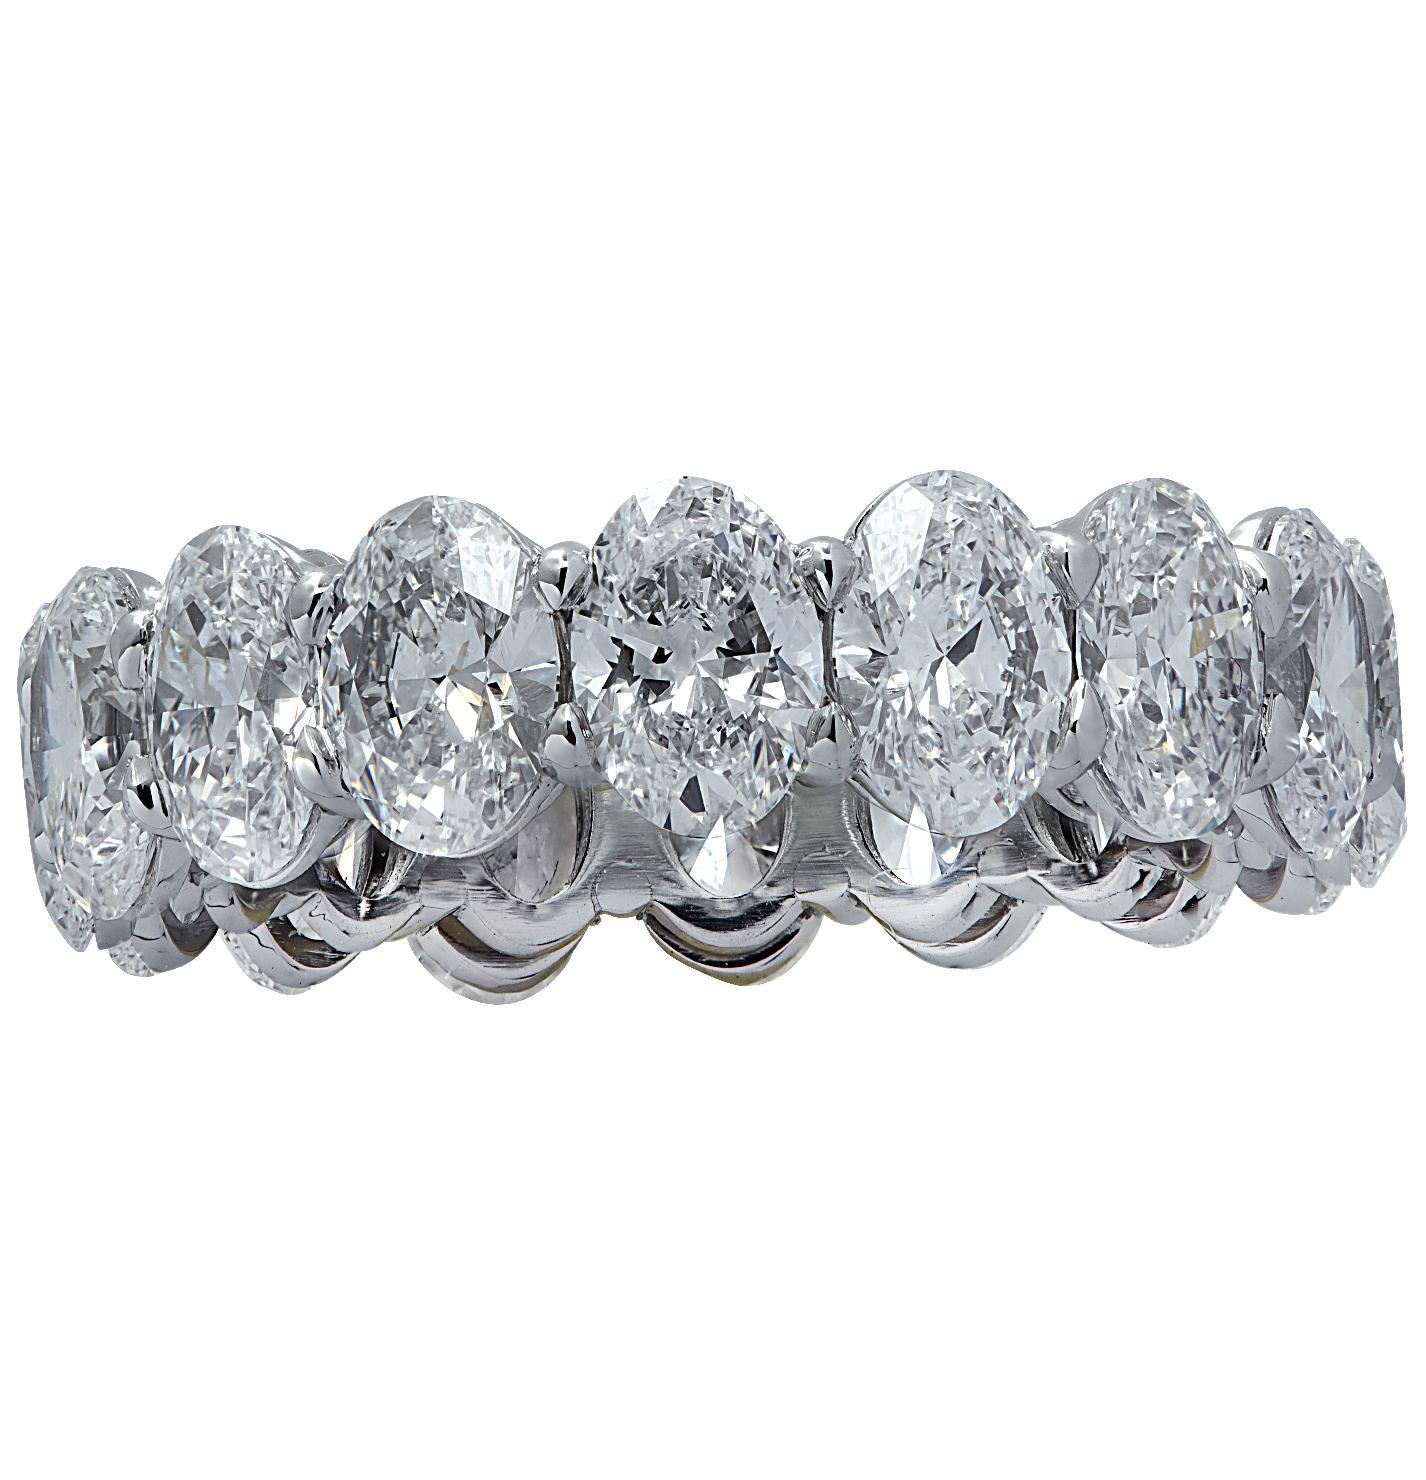 Exquisite Vivid Diamonds eternity band crafted by hand in Platinum, showcasing 16 stunning GIA Certified oval cut diamonds weighing 6.61 carats total, D-E color, VVS2-VS1 clarity. Each diamond is carefully selected, perfectly matched and set in a